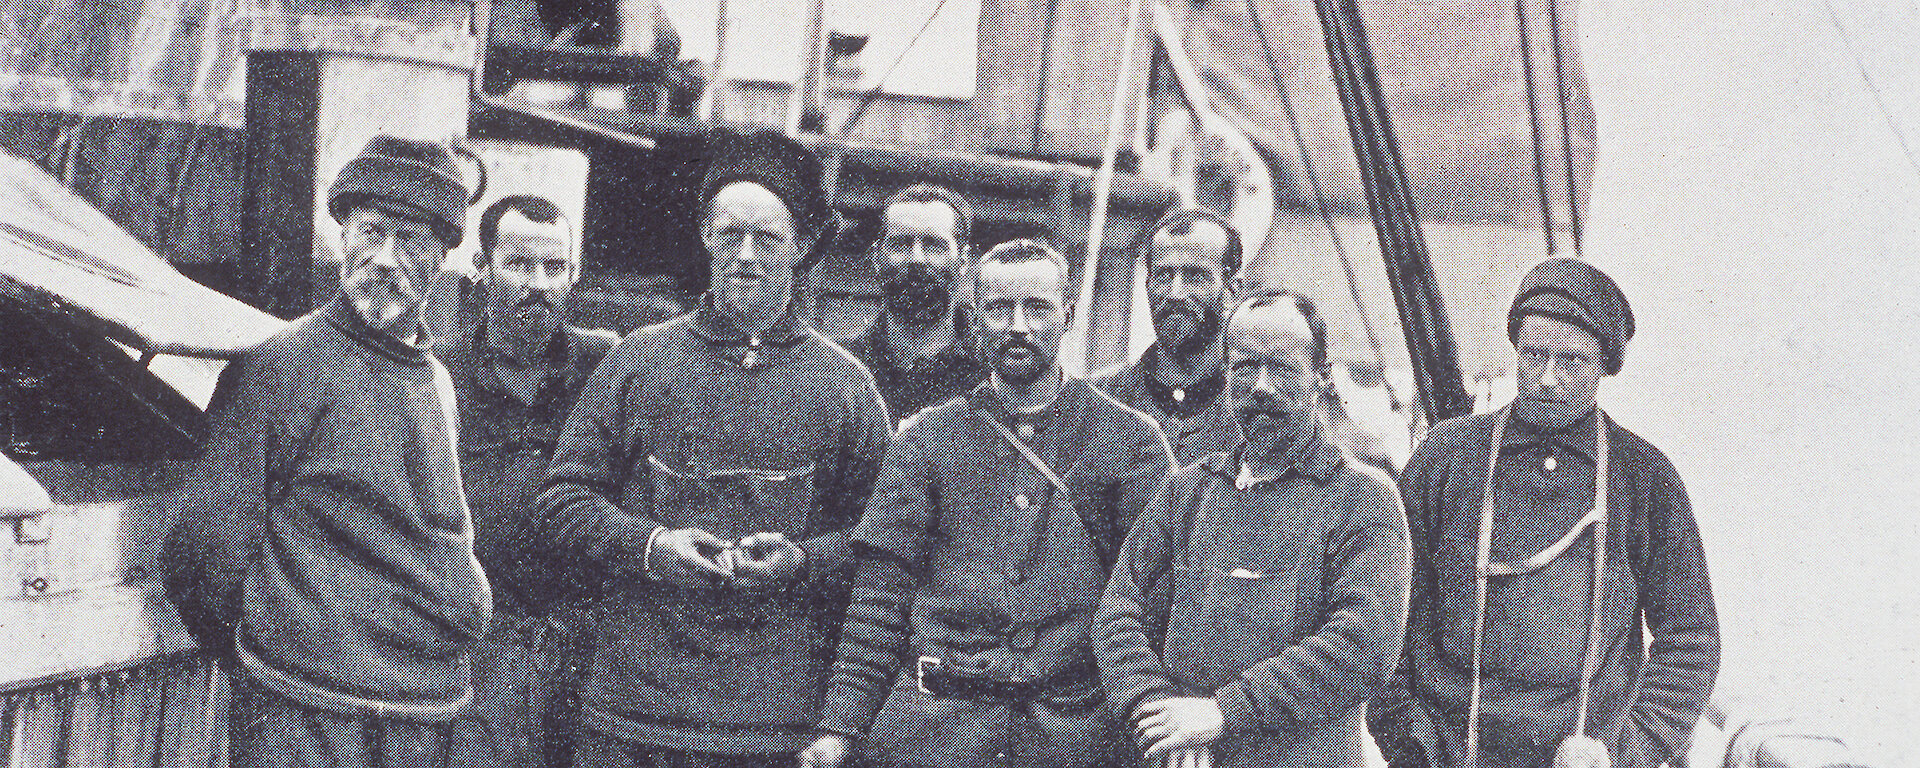 A black and white photo of a group of expeditioners.